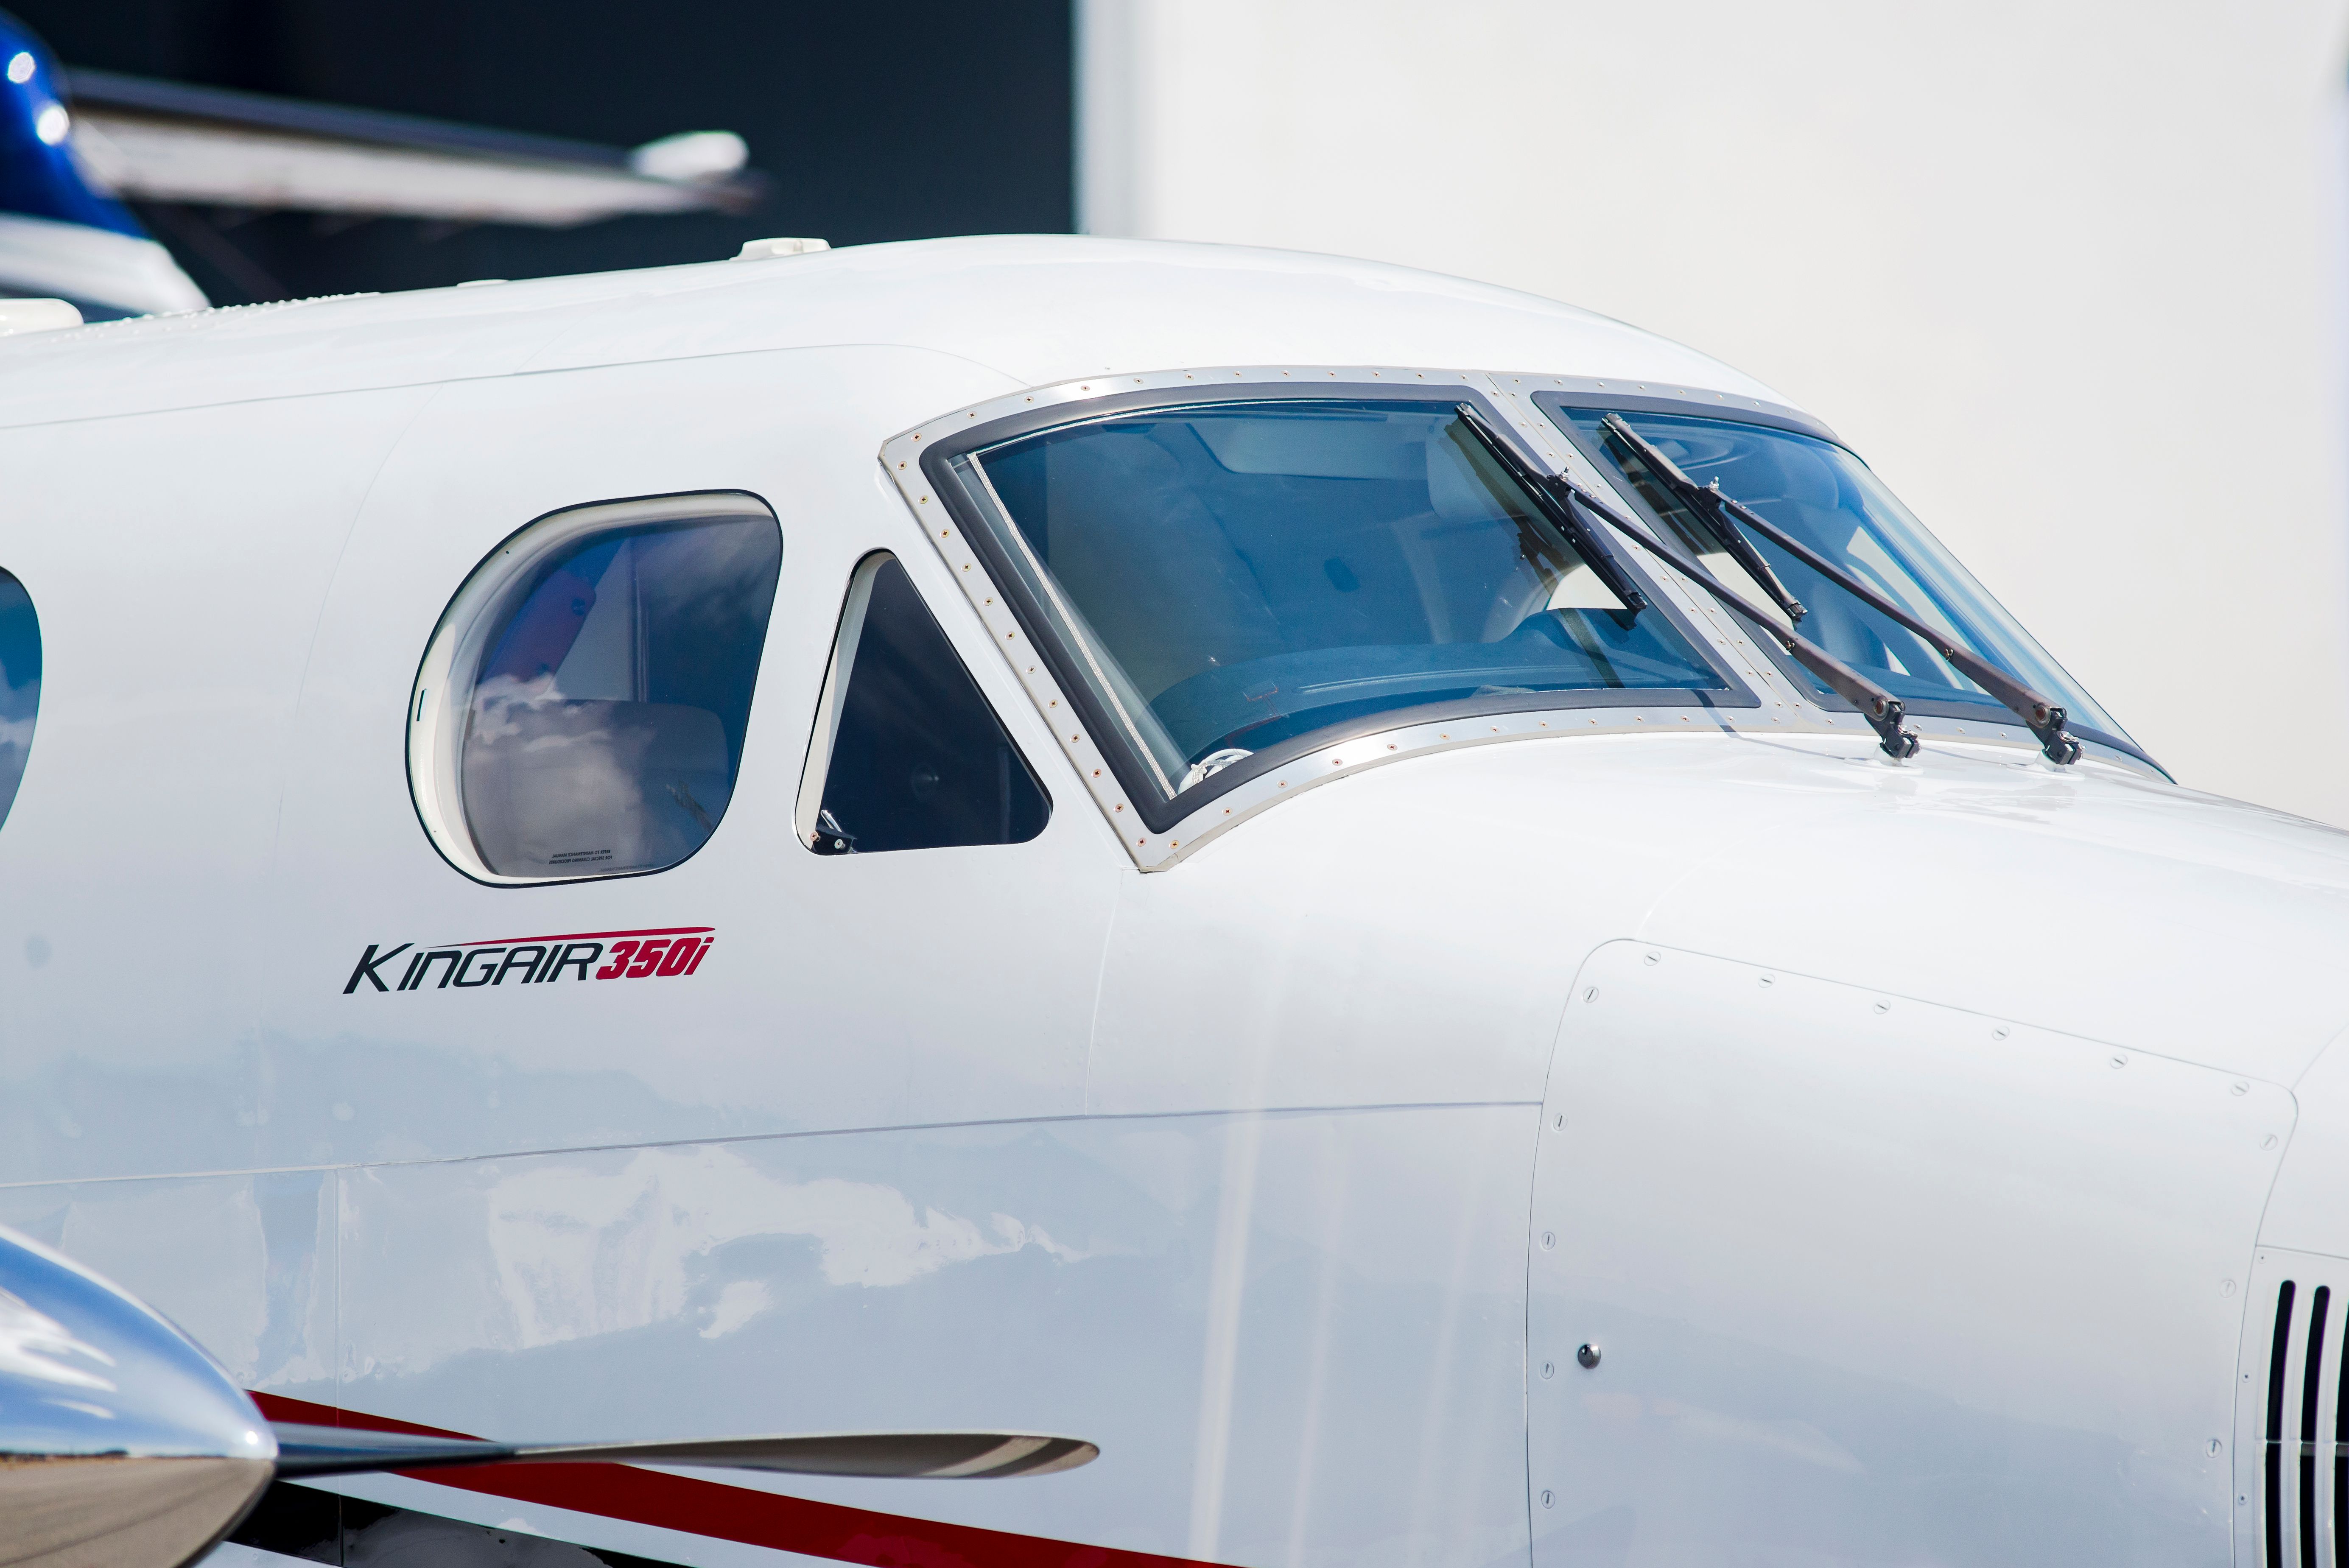 Detail of Beechcraft King Air 350i on display during Singapore Airshow